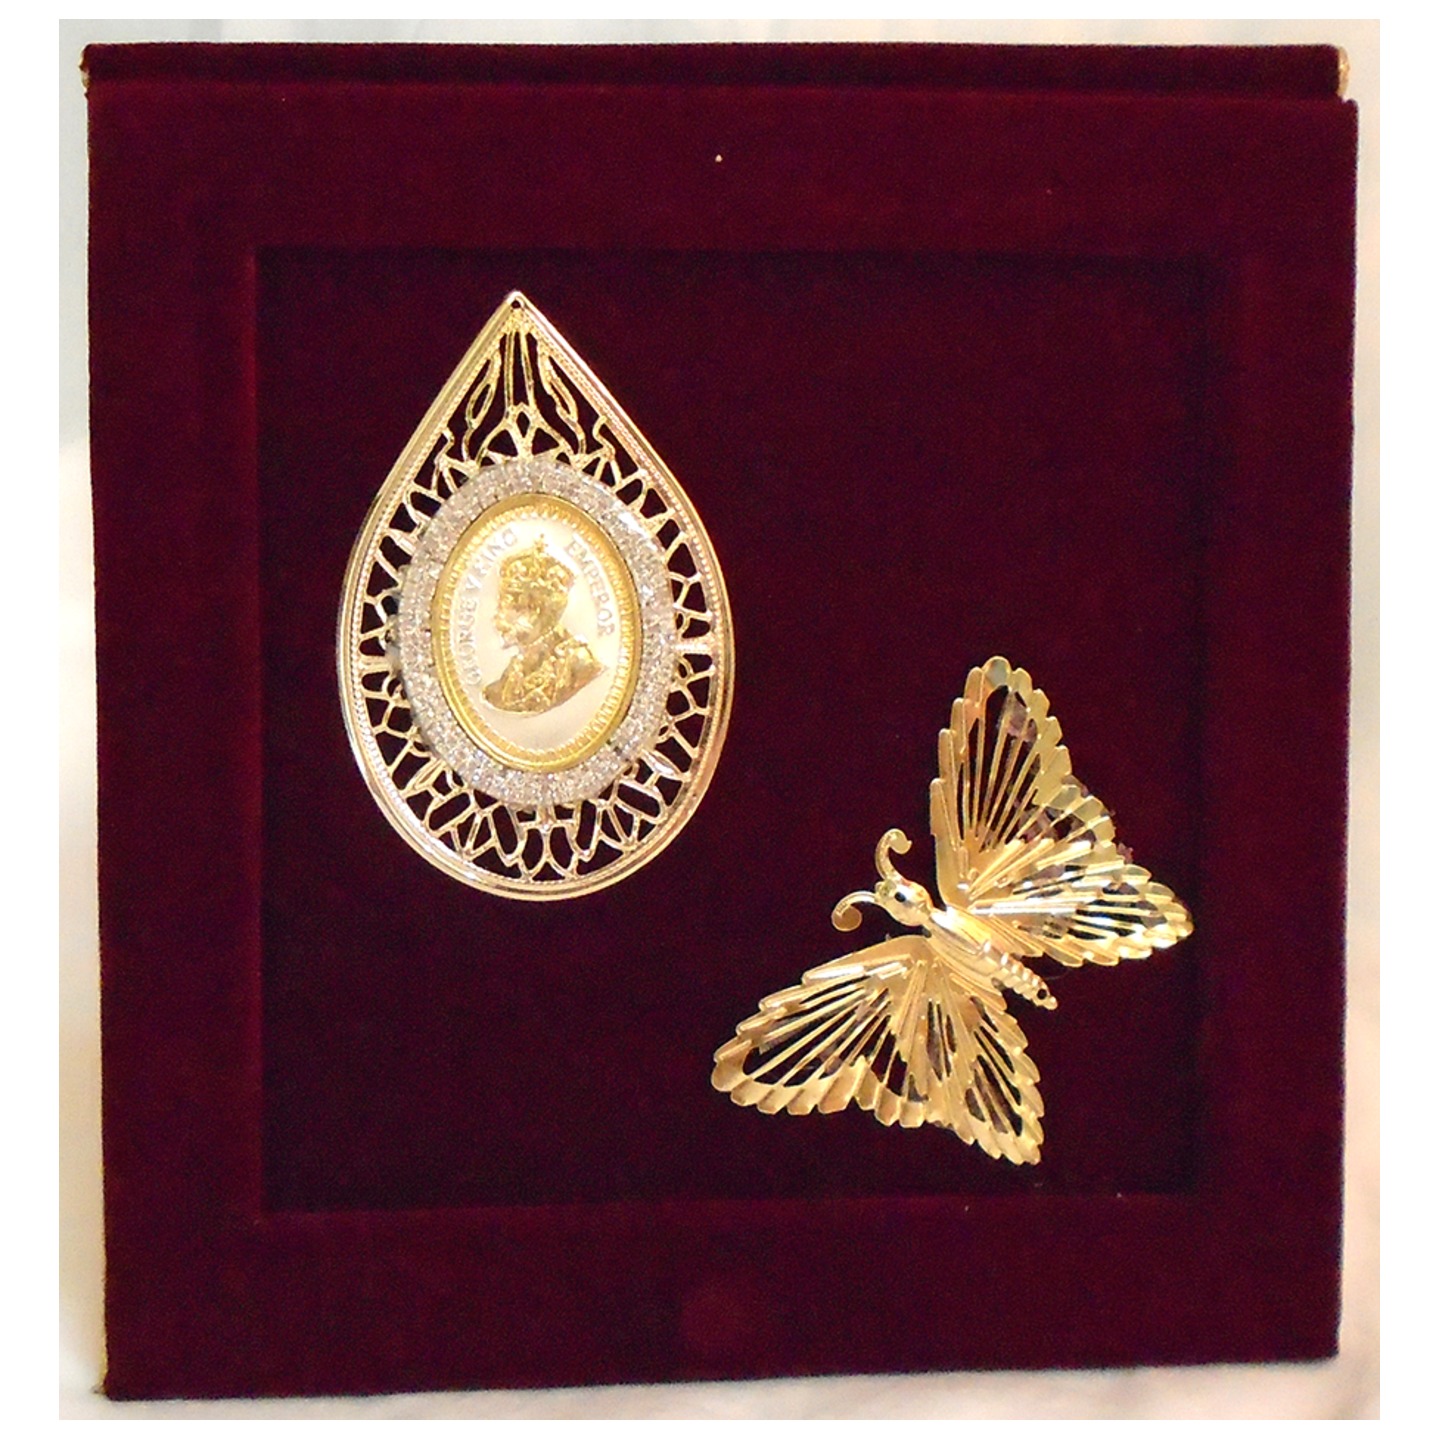 The Golden Butterfly Zircon George King  Silver Coin Gift Set